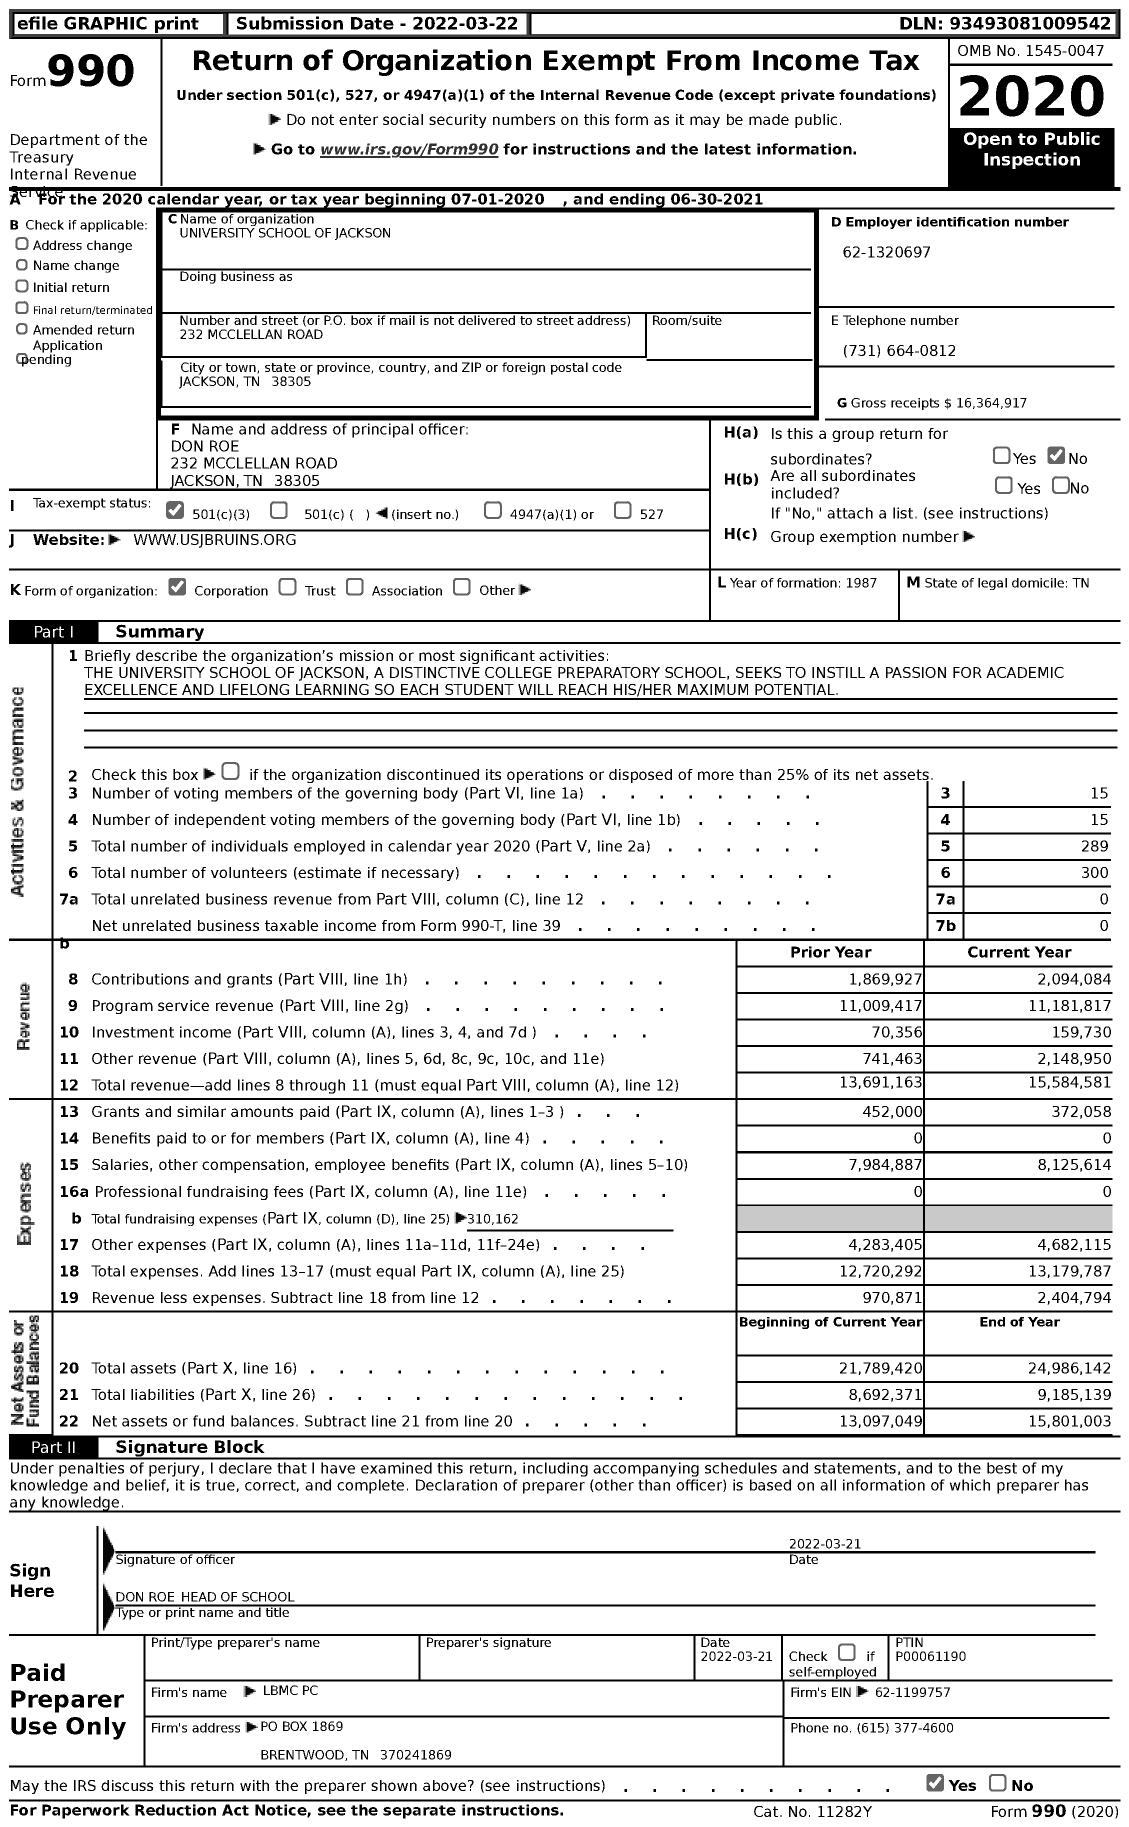 Image of first page of 2020 Form 990 for University School of Jackson (USJ)